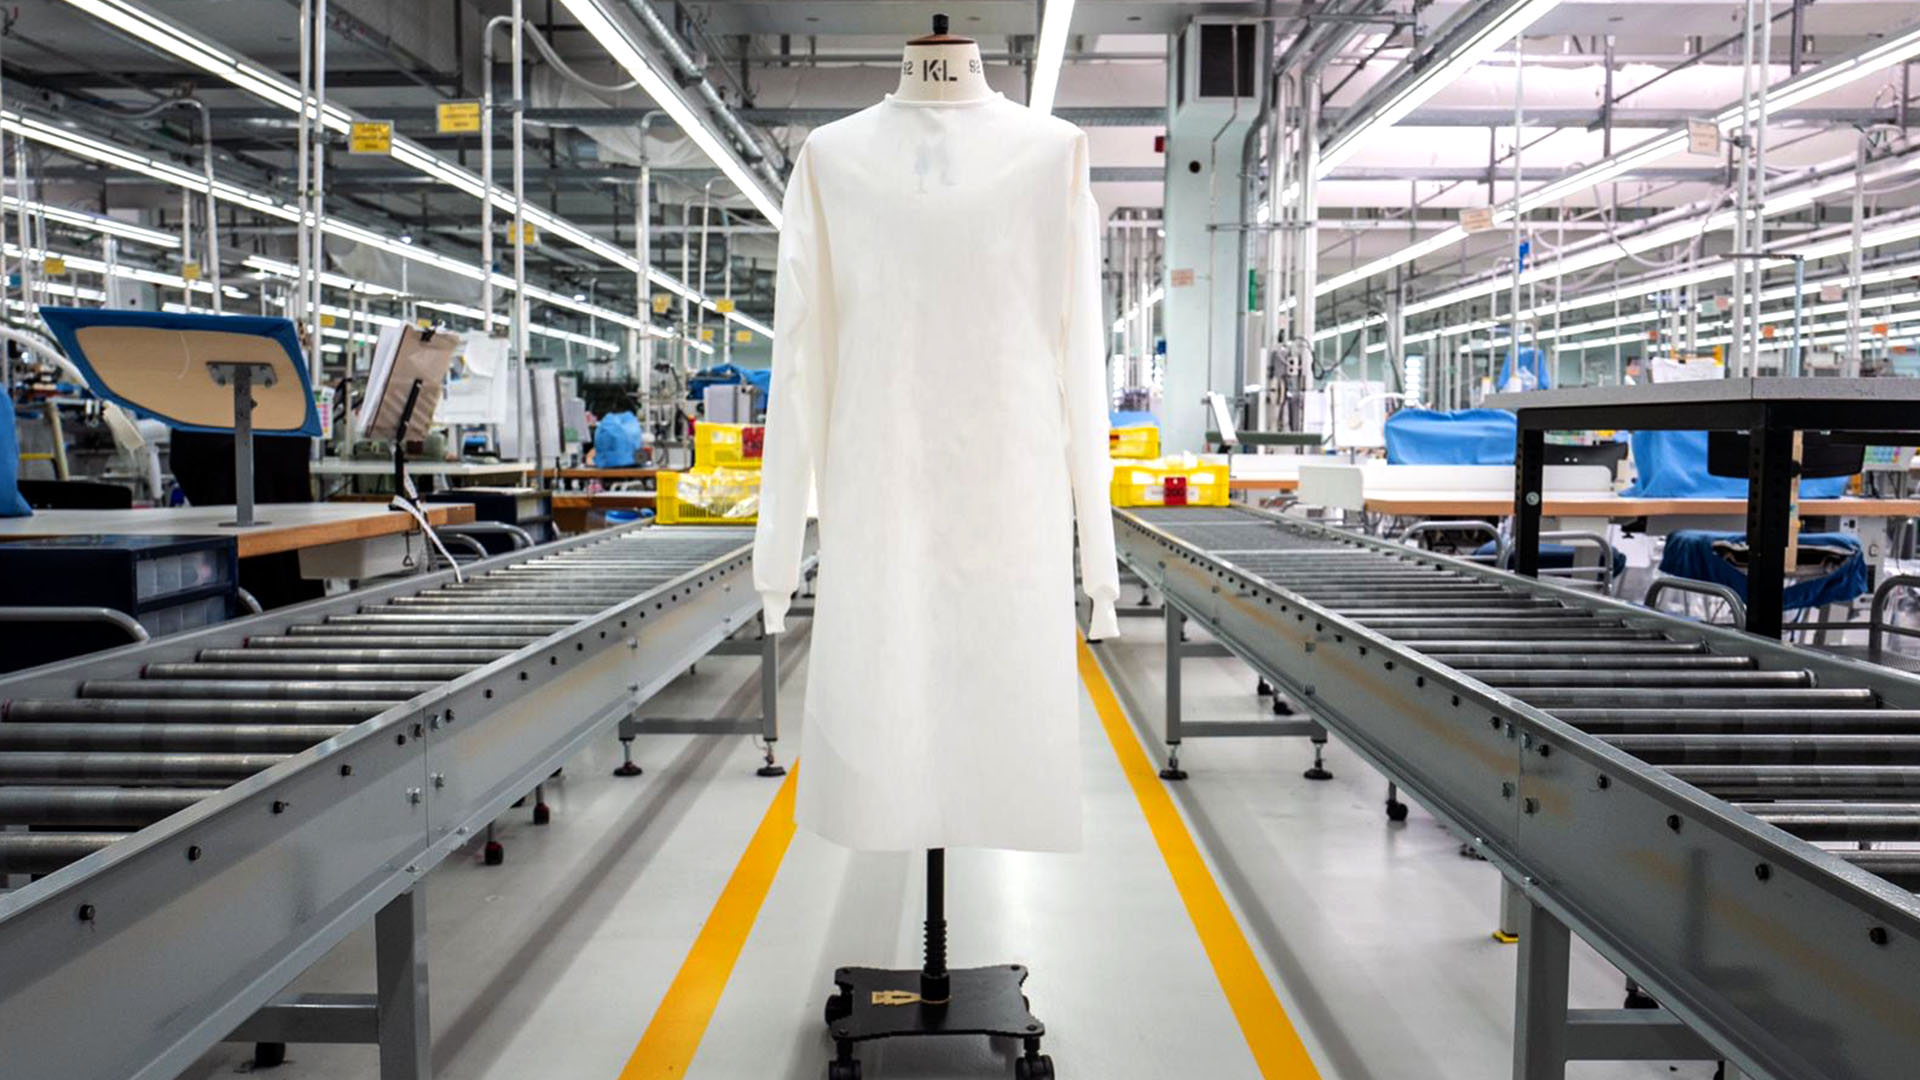 The Zegna Group reopens its facilities in Italy and Switzerland to produce PPEs